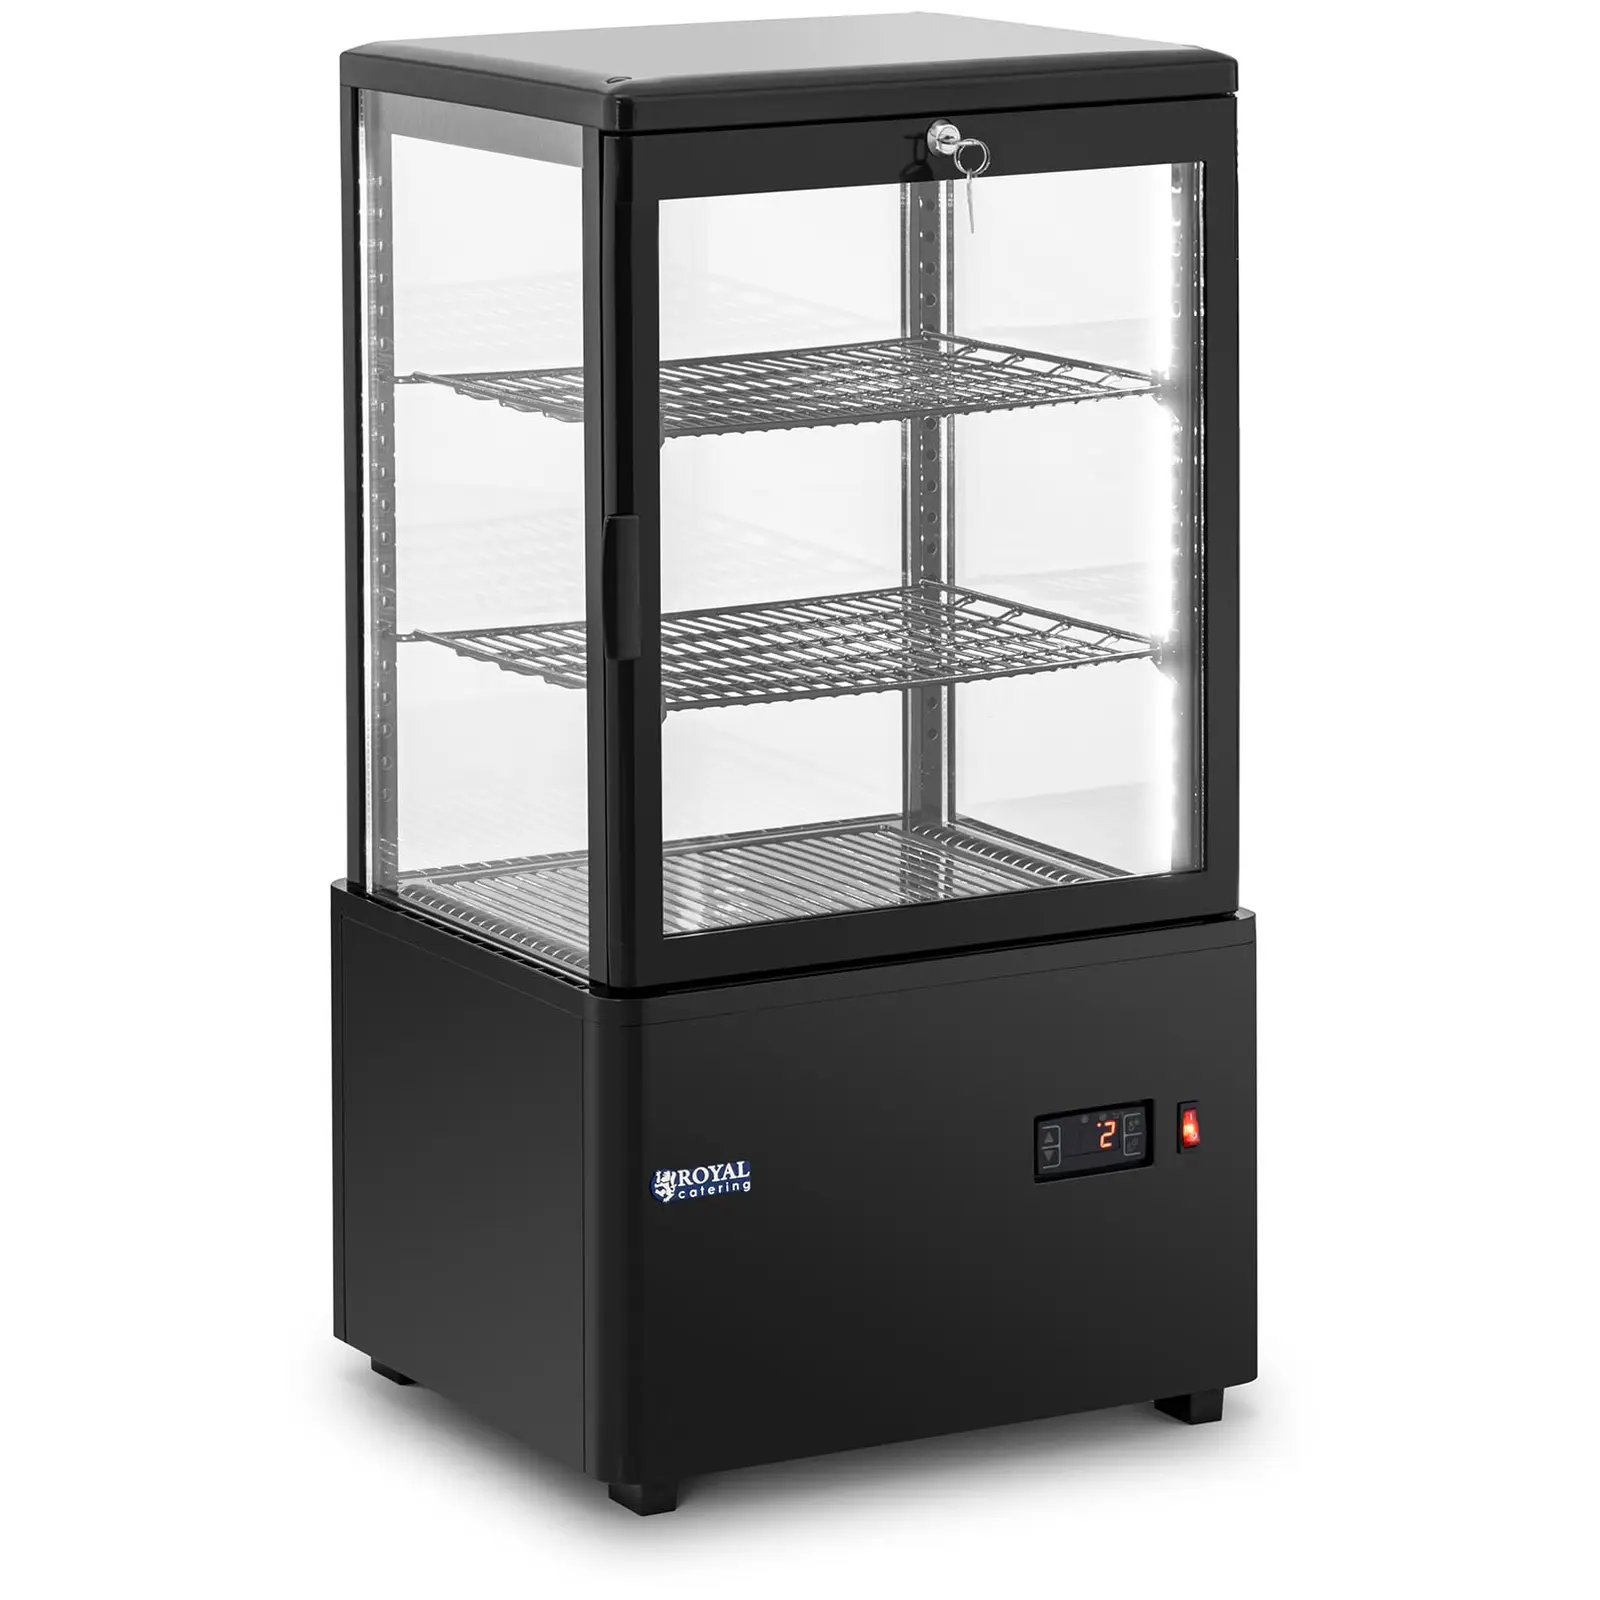 Refrigerated Display Case - 58 L - Royal Catering - 3 levels - black - locking